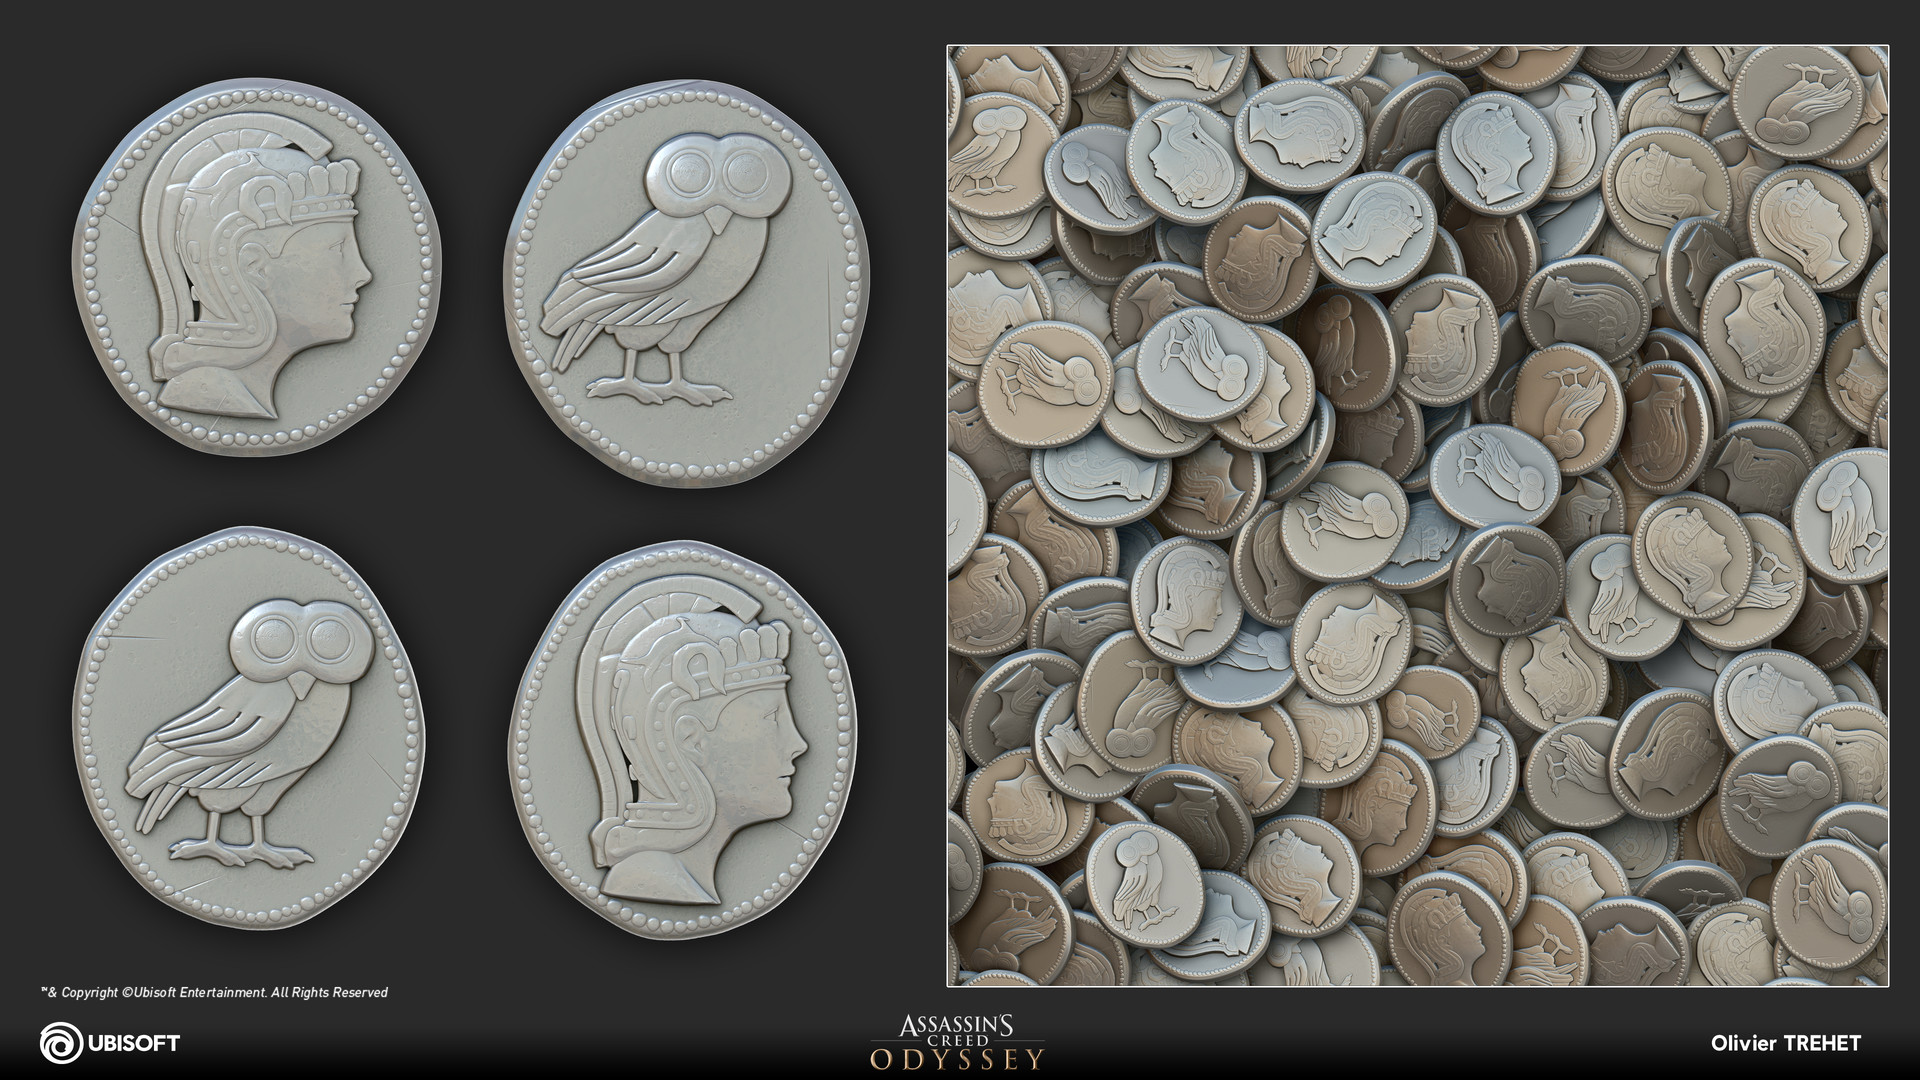 Assassin's Creed Bloodlines coins/monedas